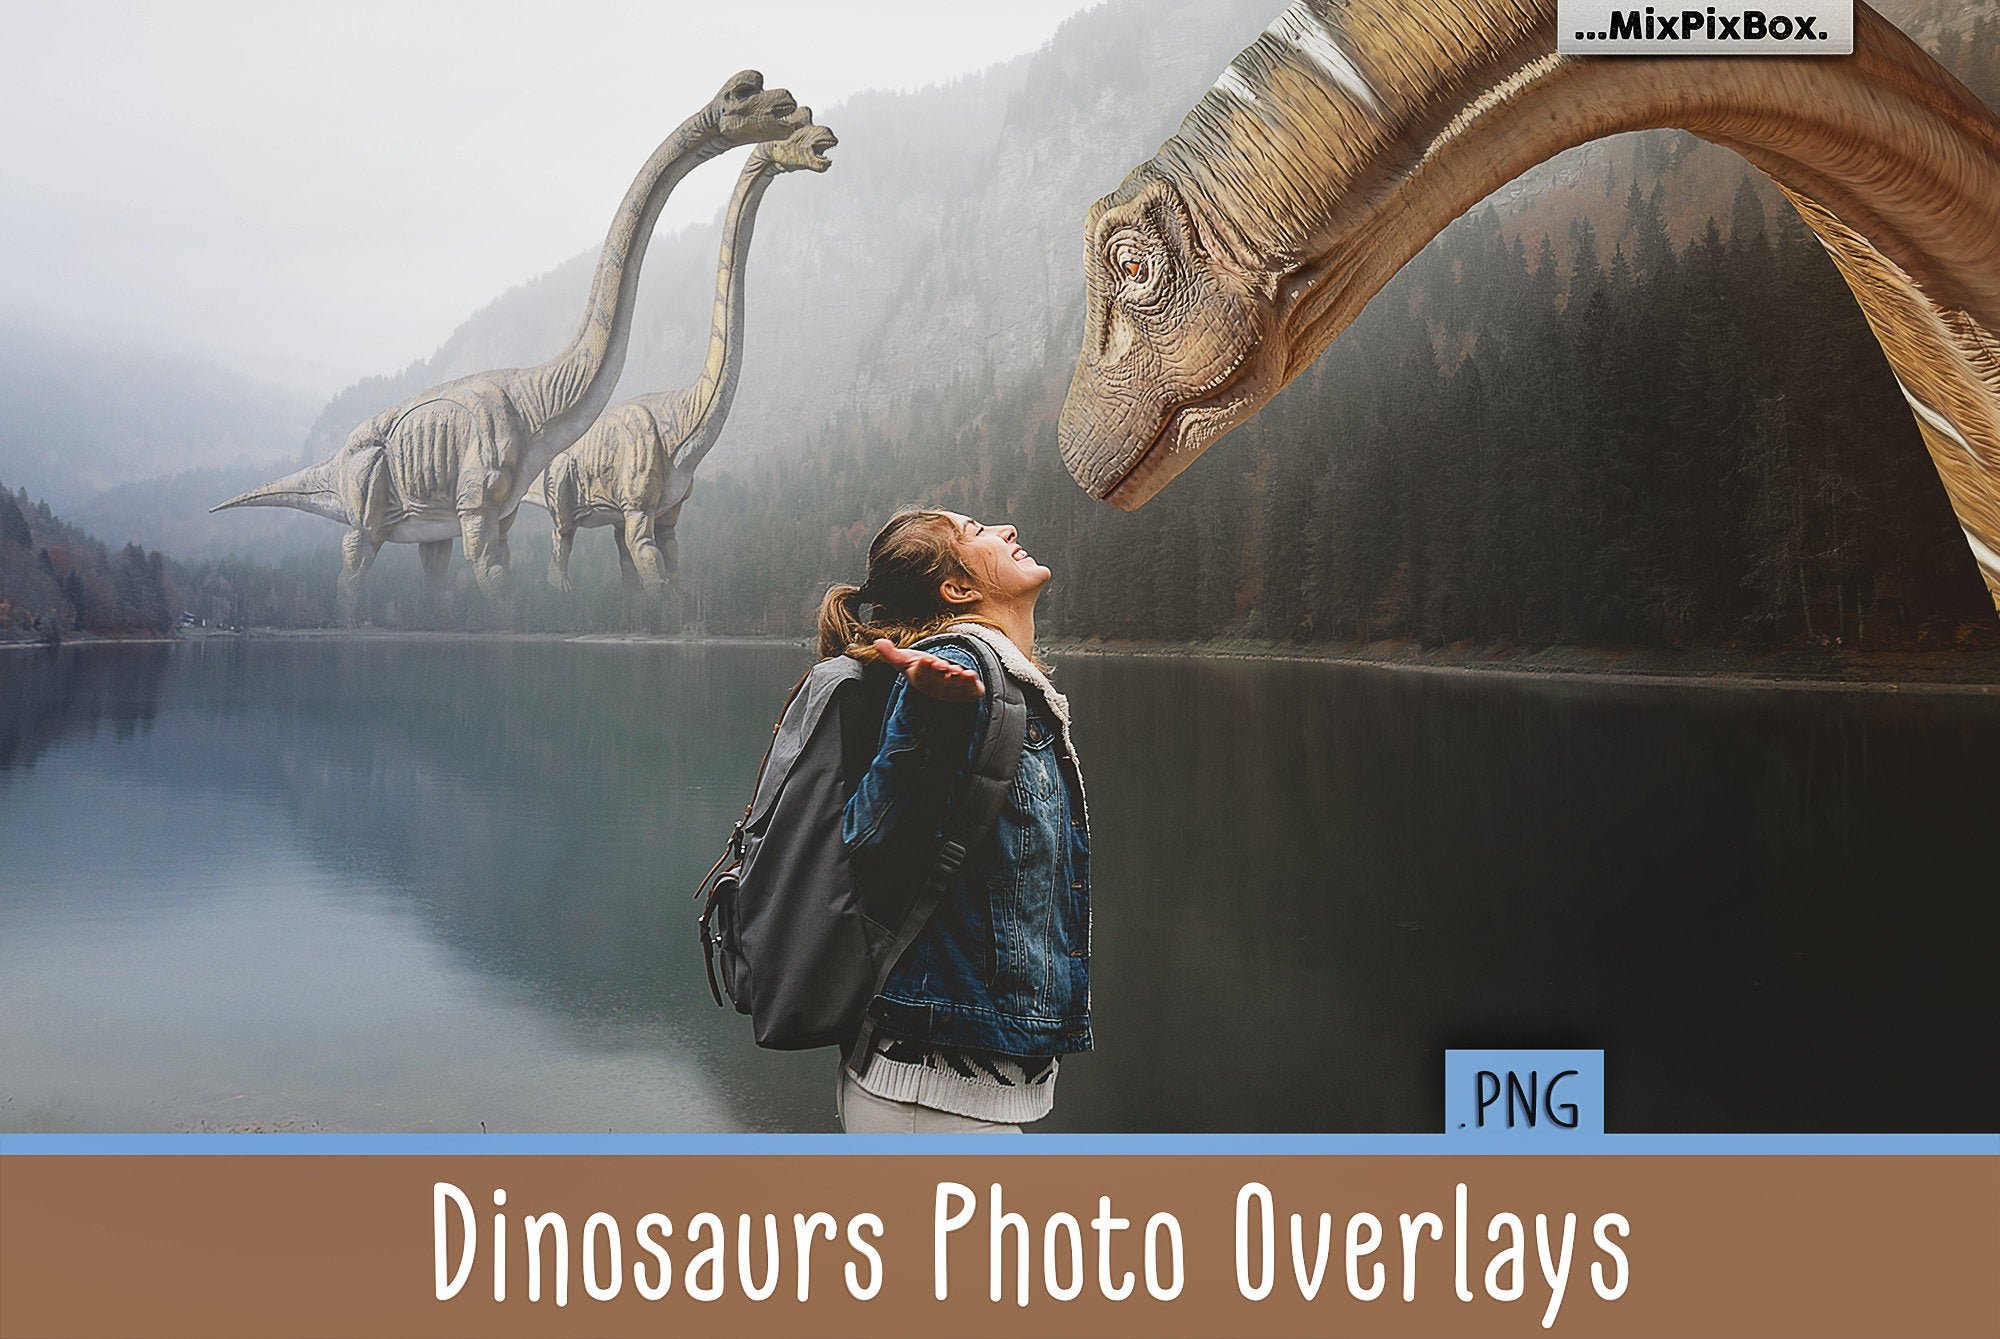 Dinosaurs Photo Overlays Packcover image.